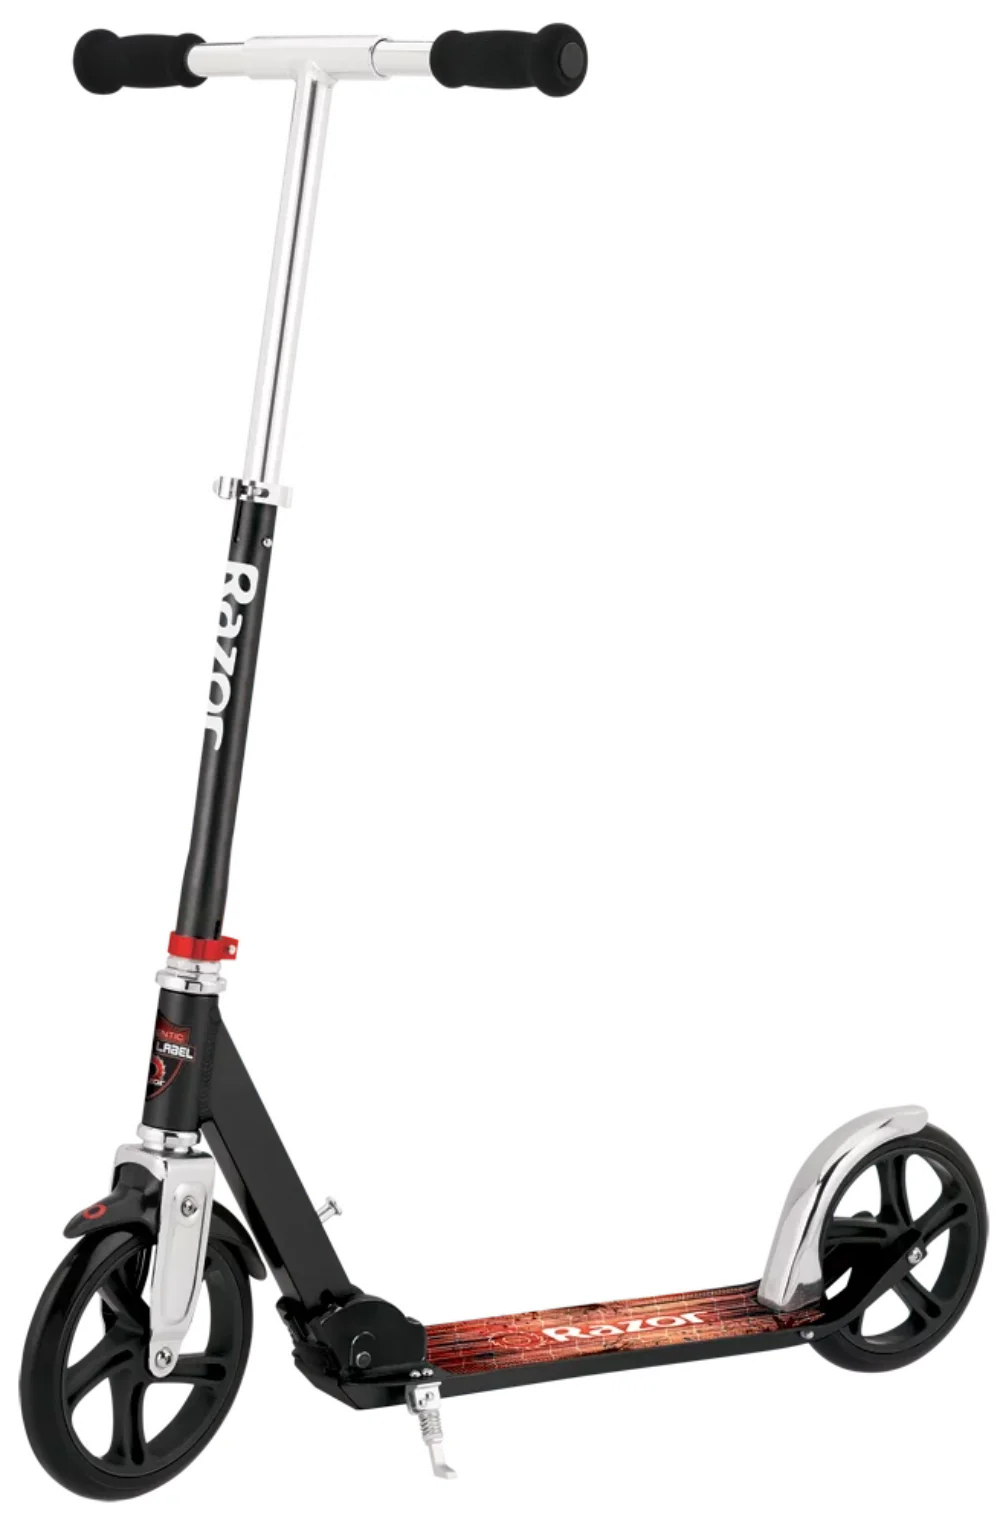 A5 Lux Black Label Kick Scooter - Large 8 In. Wheels, Foldable, Adjustable Handlebars, Lightweight for Riders up to 220 Lbs.